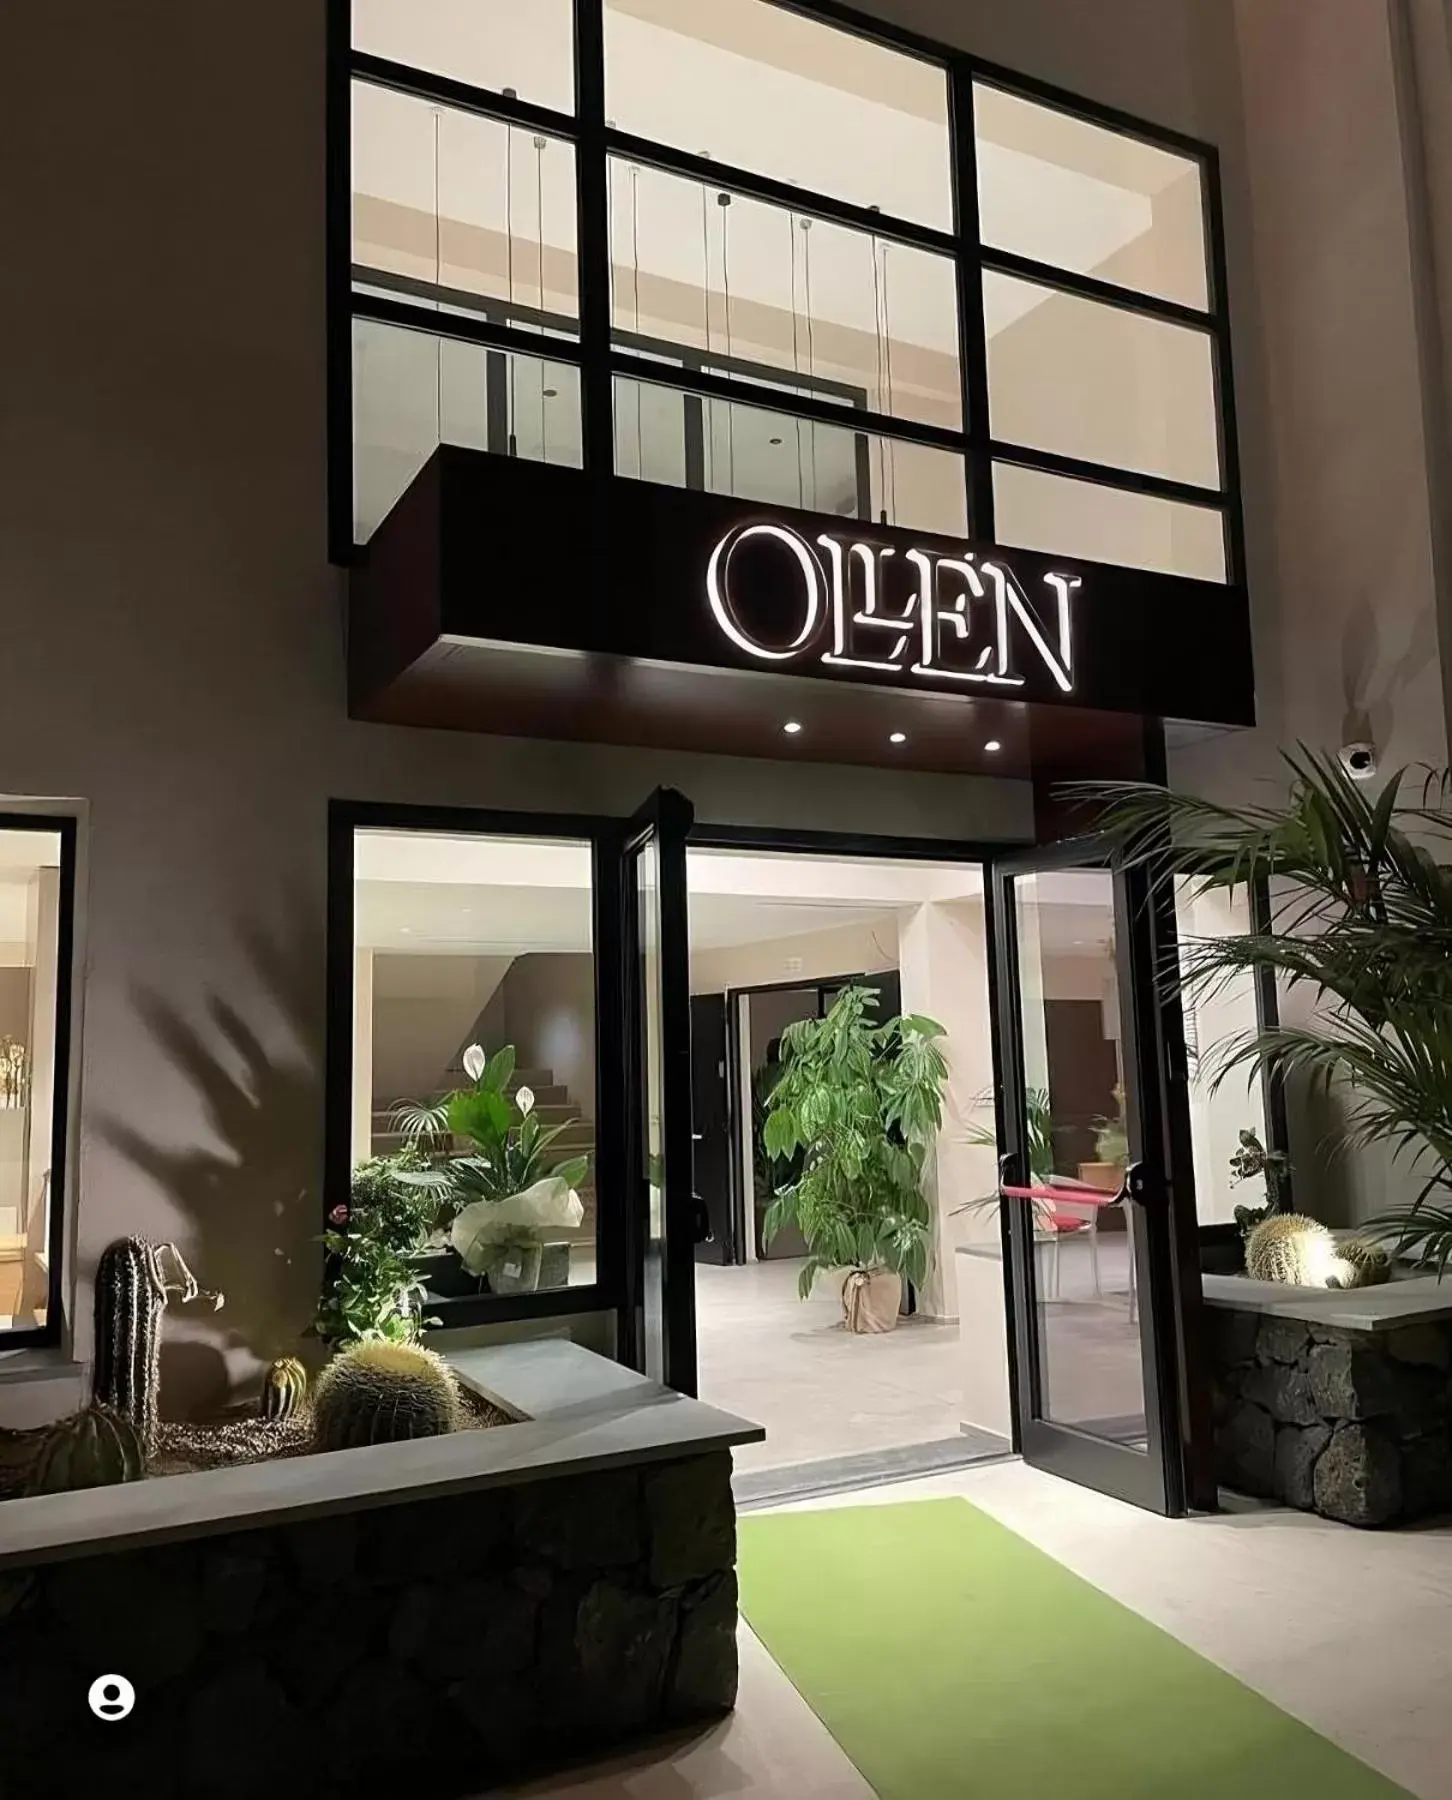 Property building in Ollen apartments